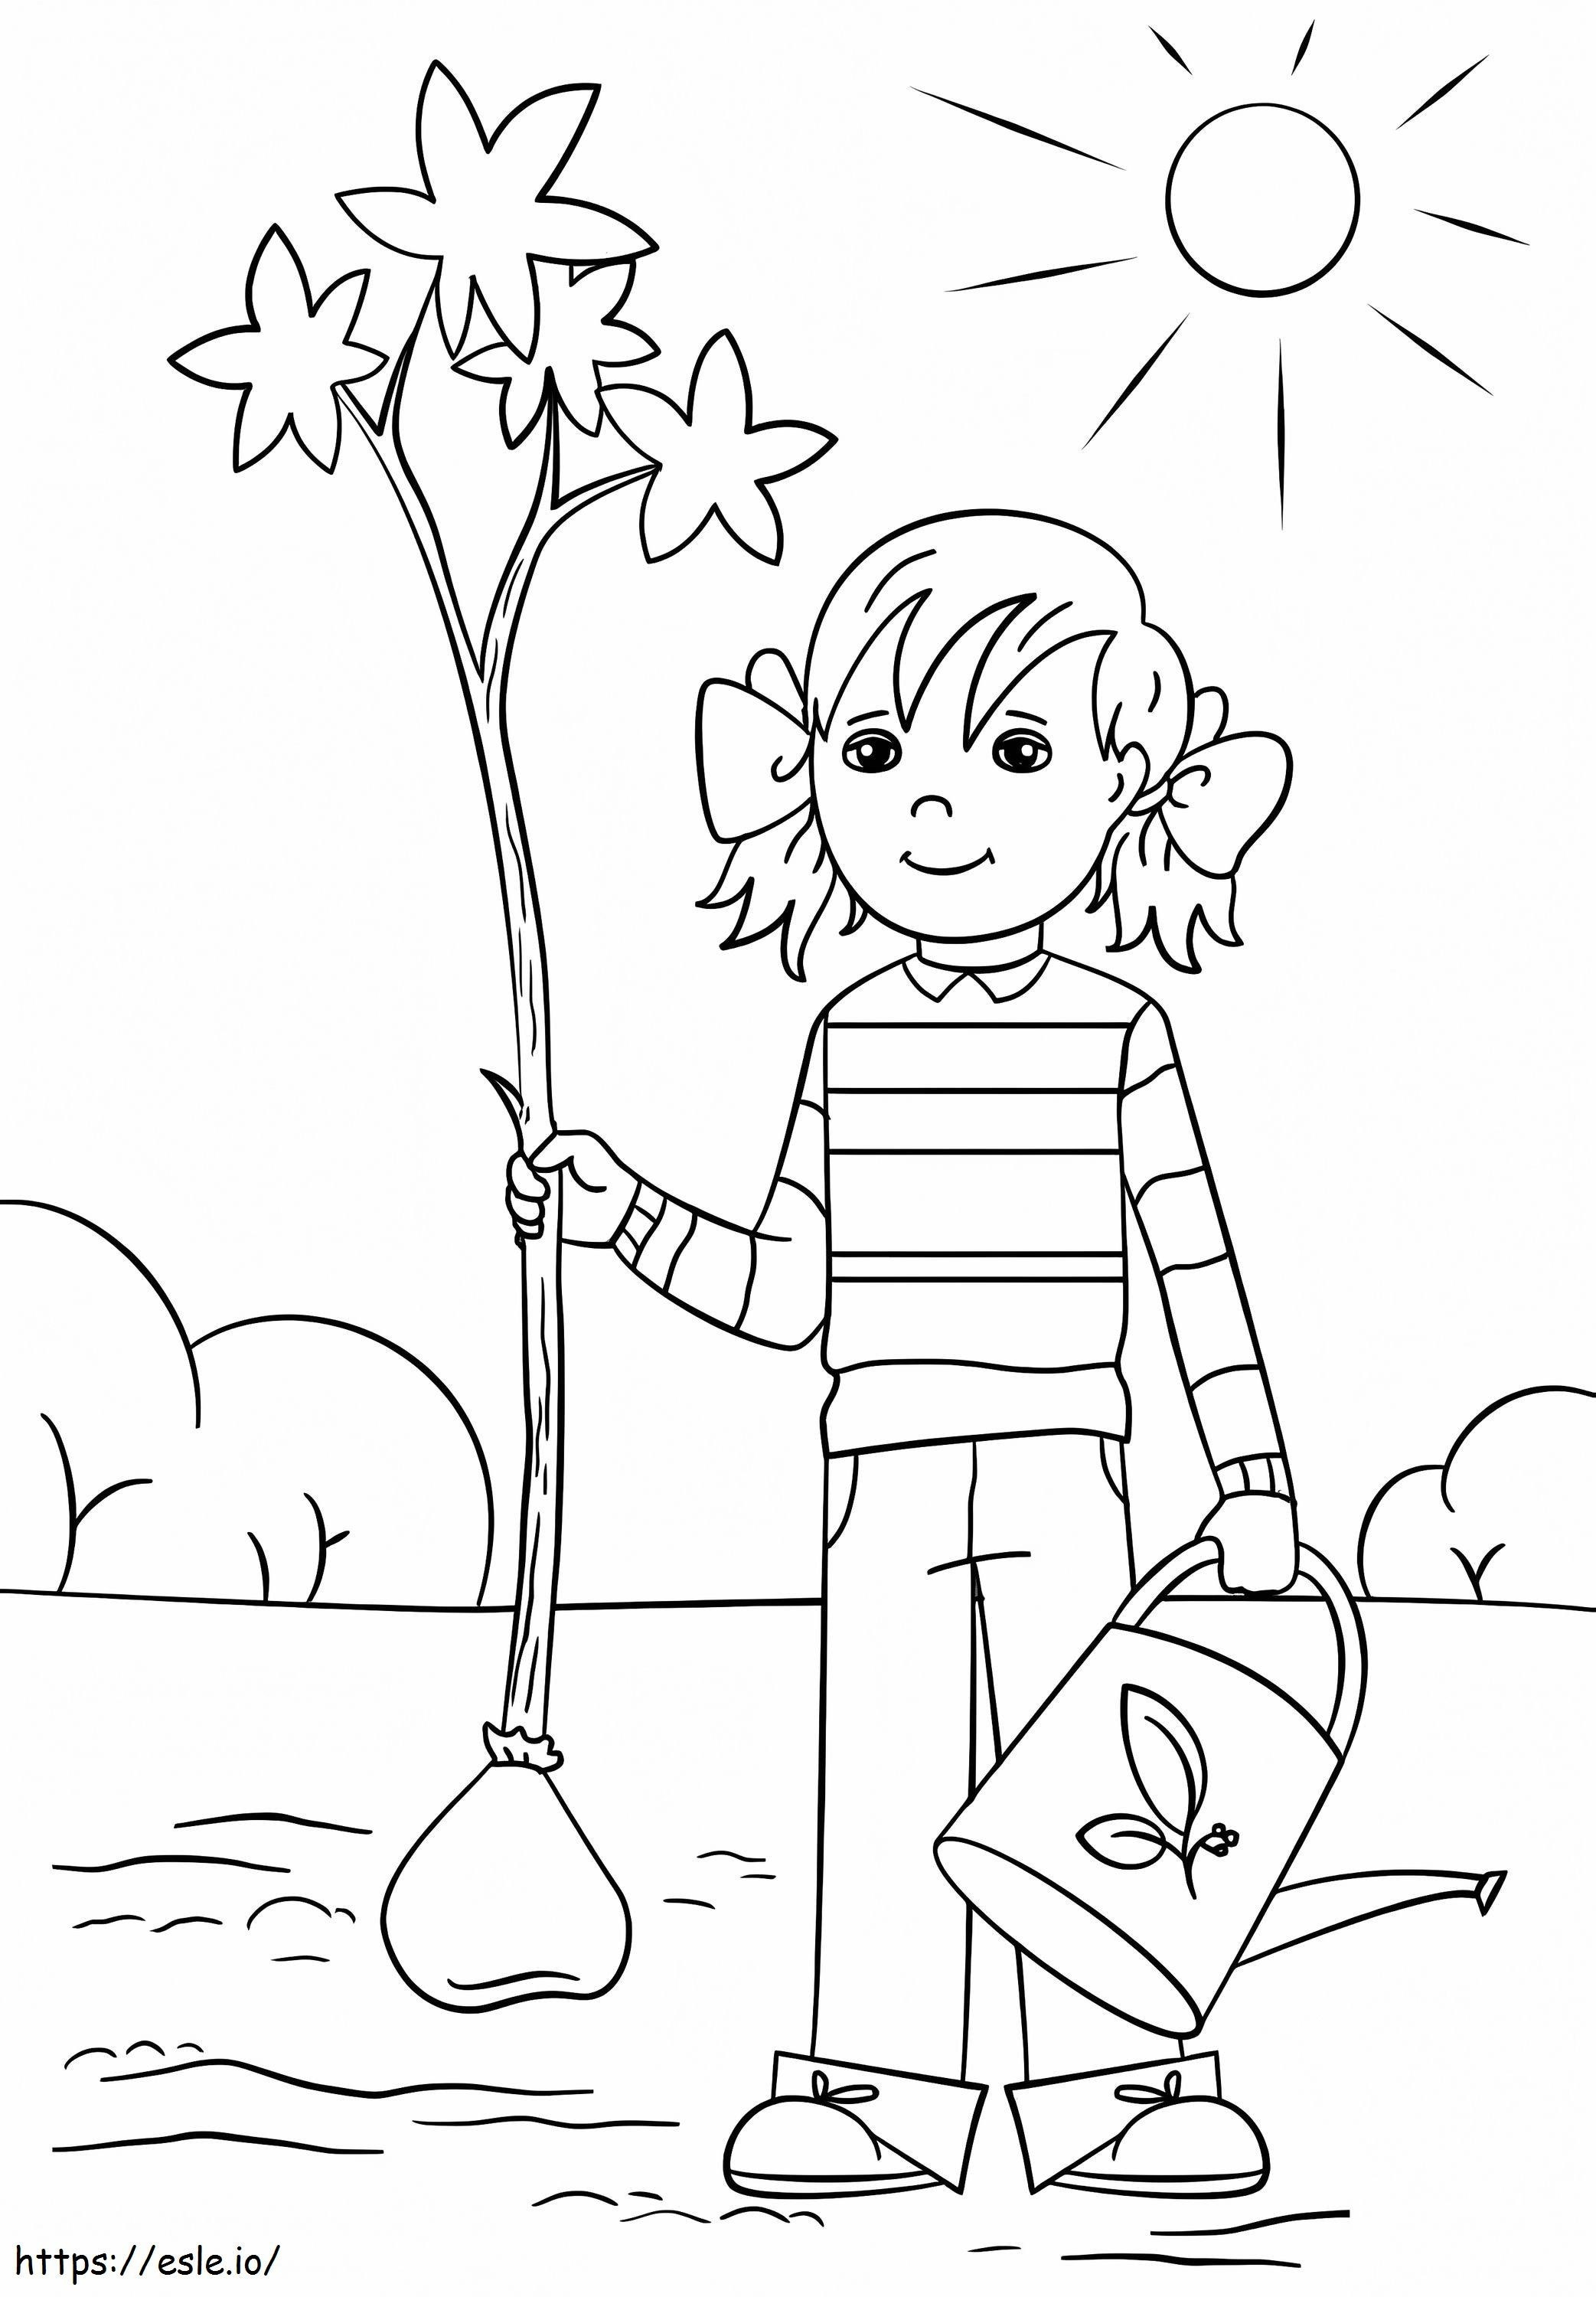 Gir Holding The Tree And Cube coloring page